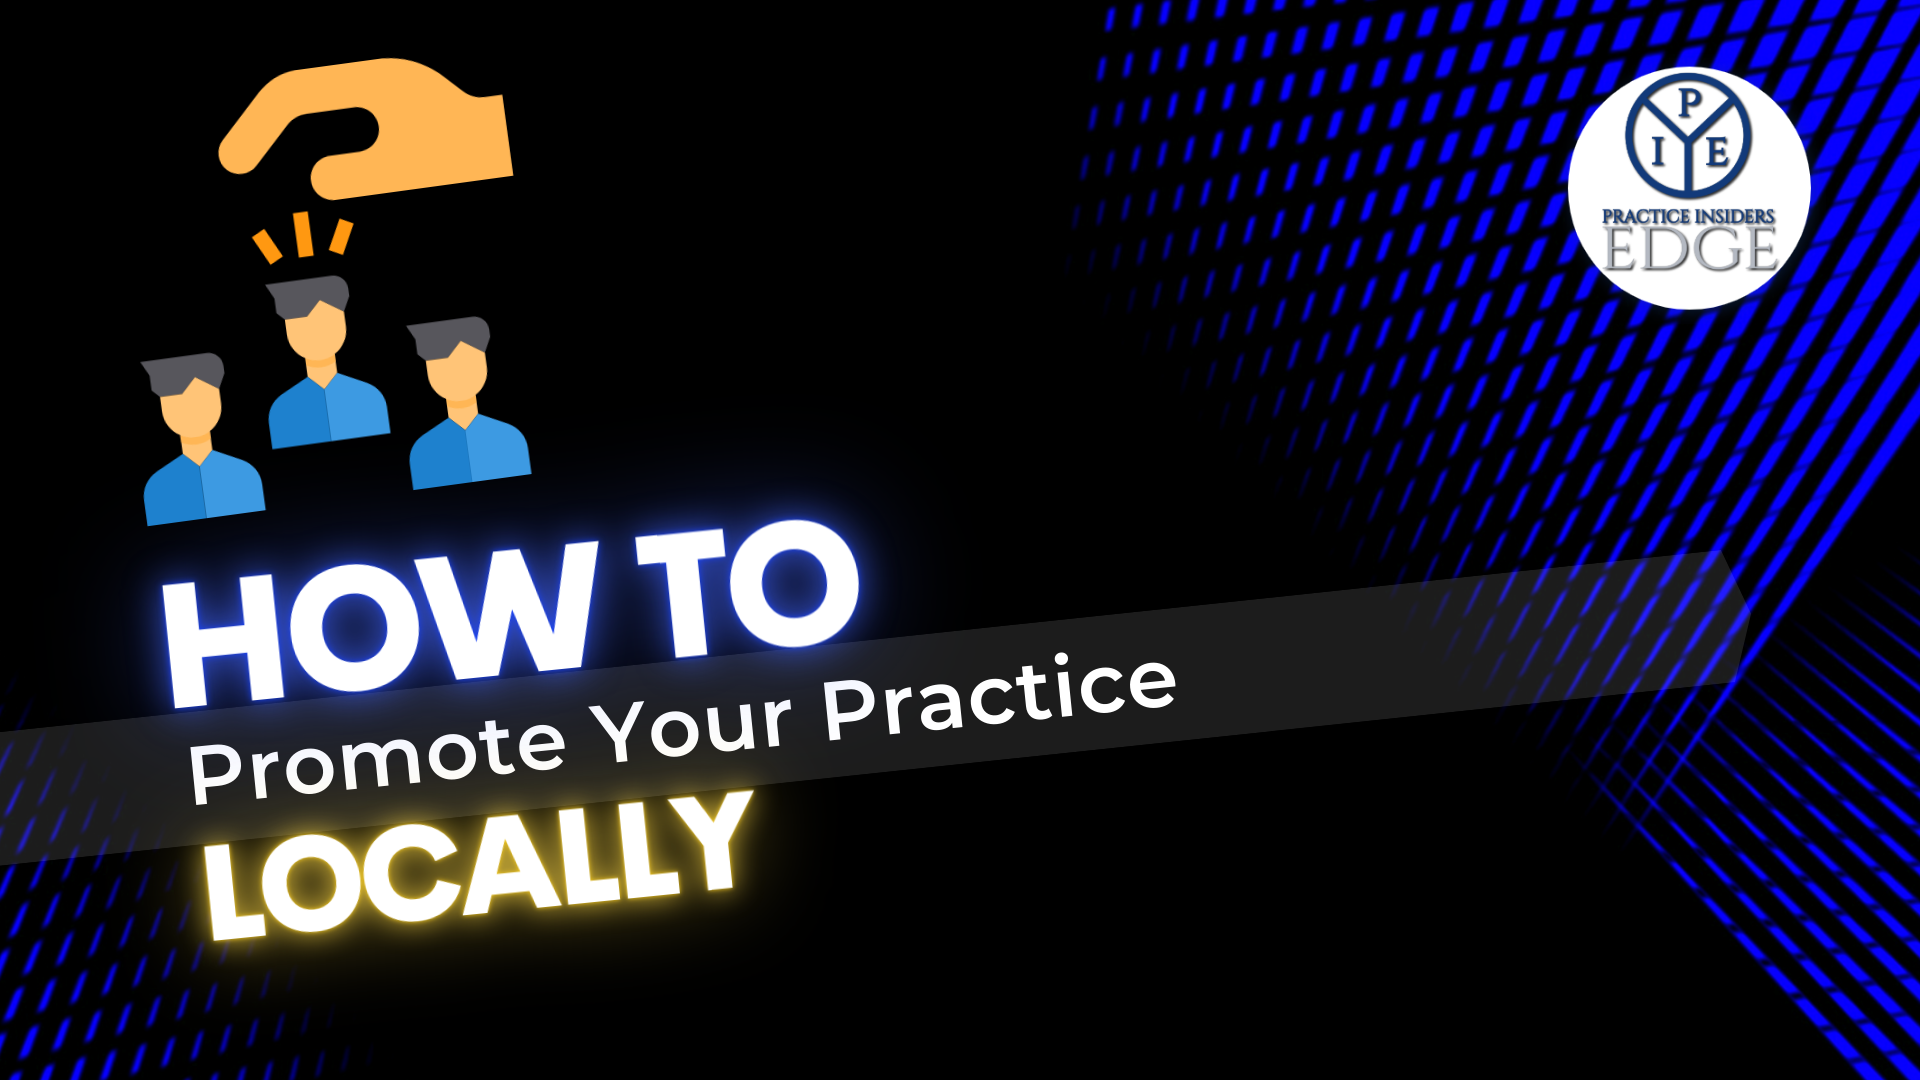 How To Promote Your Practice Locally to Attract More New Patients